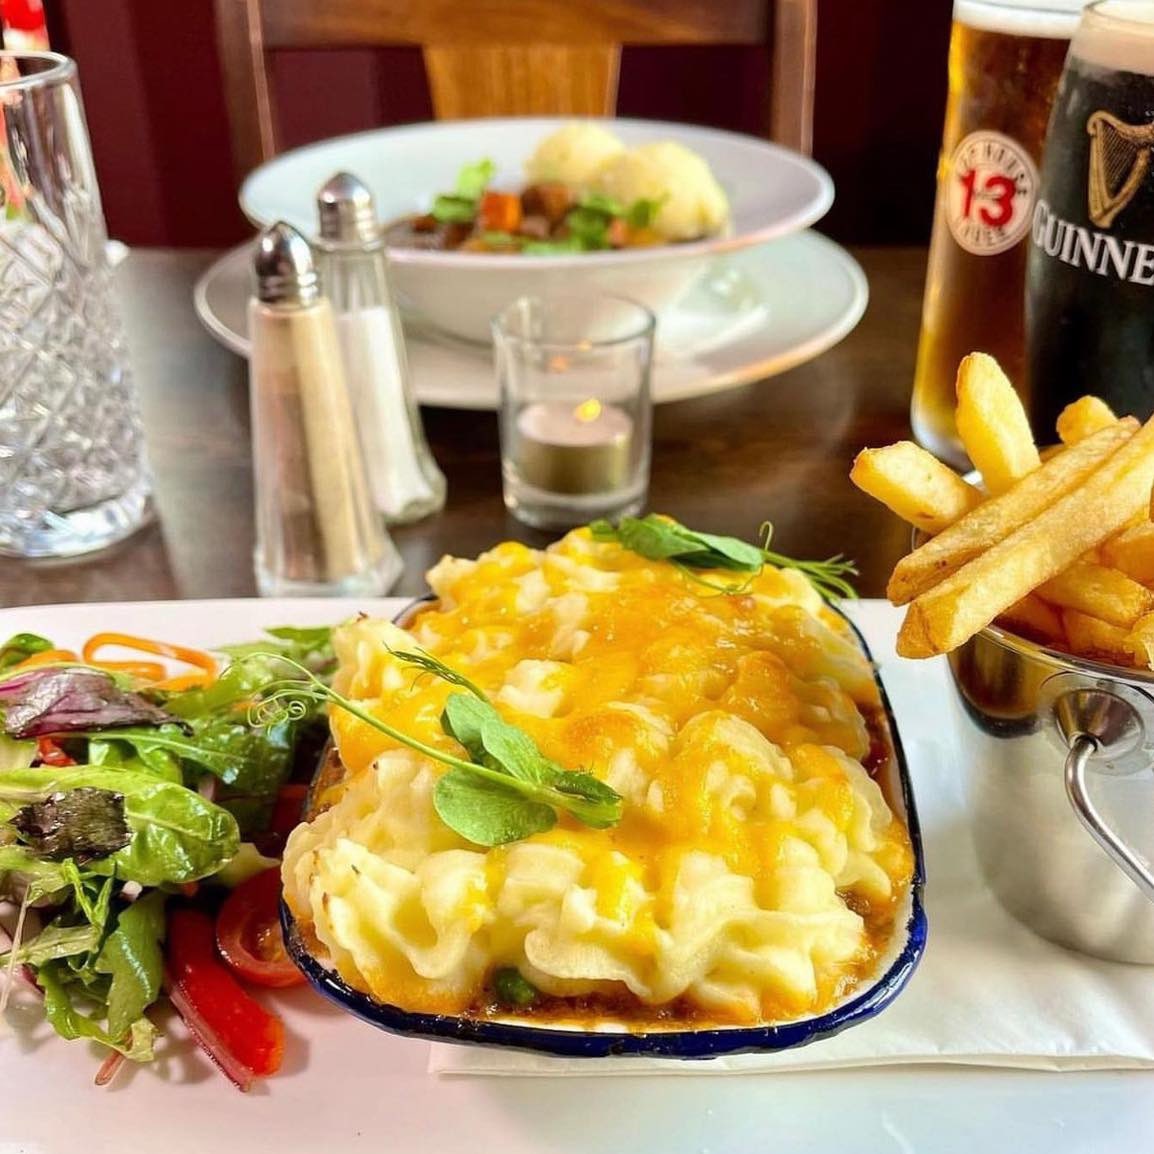 Indulge in some hearty food, great drinks and live music here in The Norseman today ☘️

Open from 12pm - Live Music right through until closing

#thenorseman #pub #templebar #dublin #dublinpubs #sunday #alldaymenu #pints #livemusic